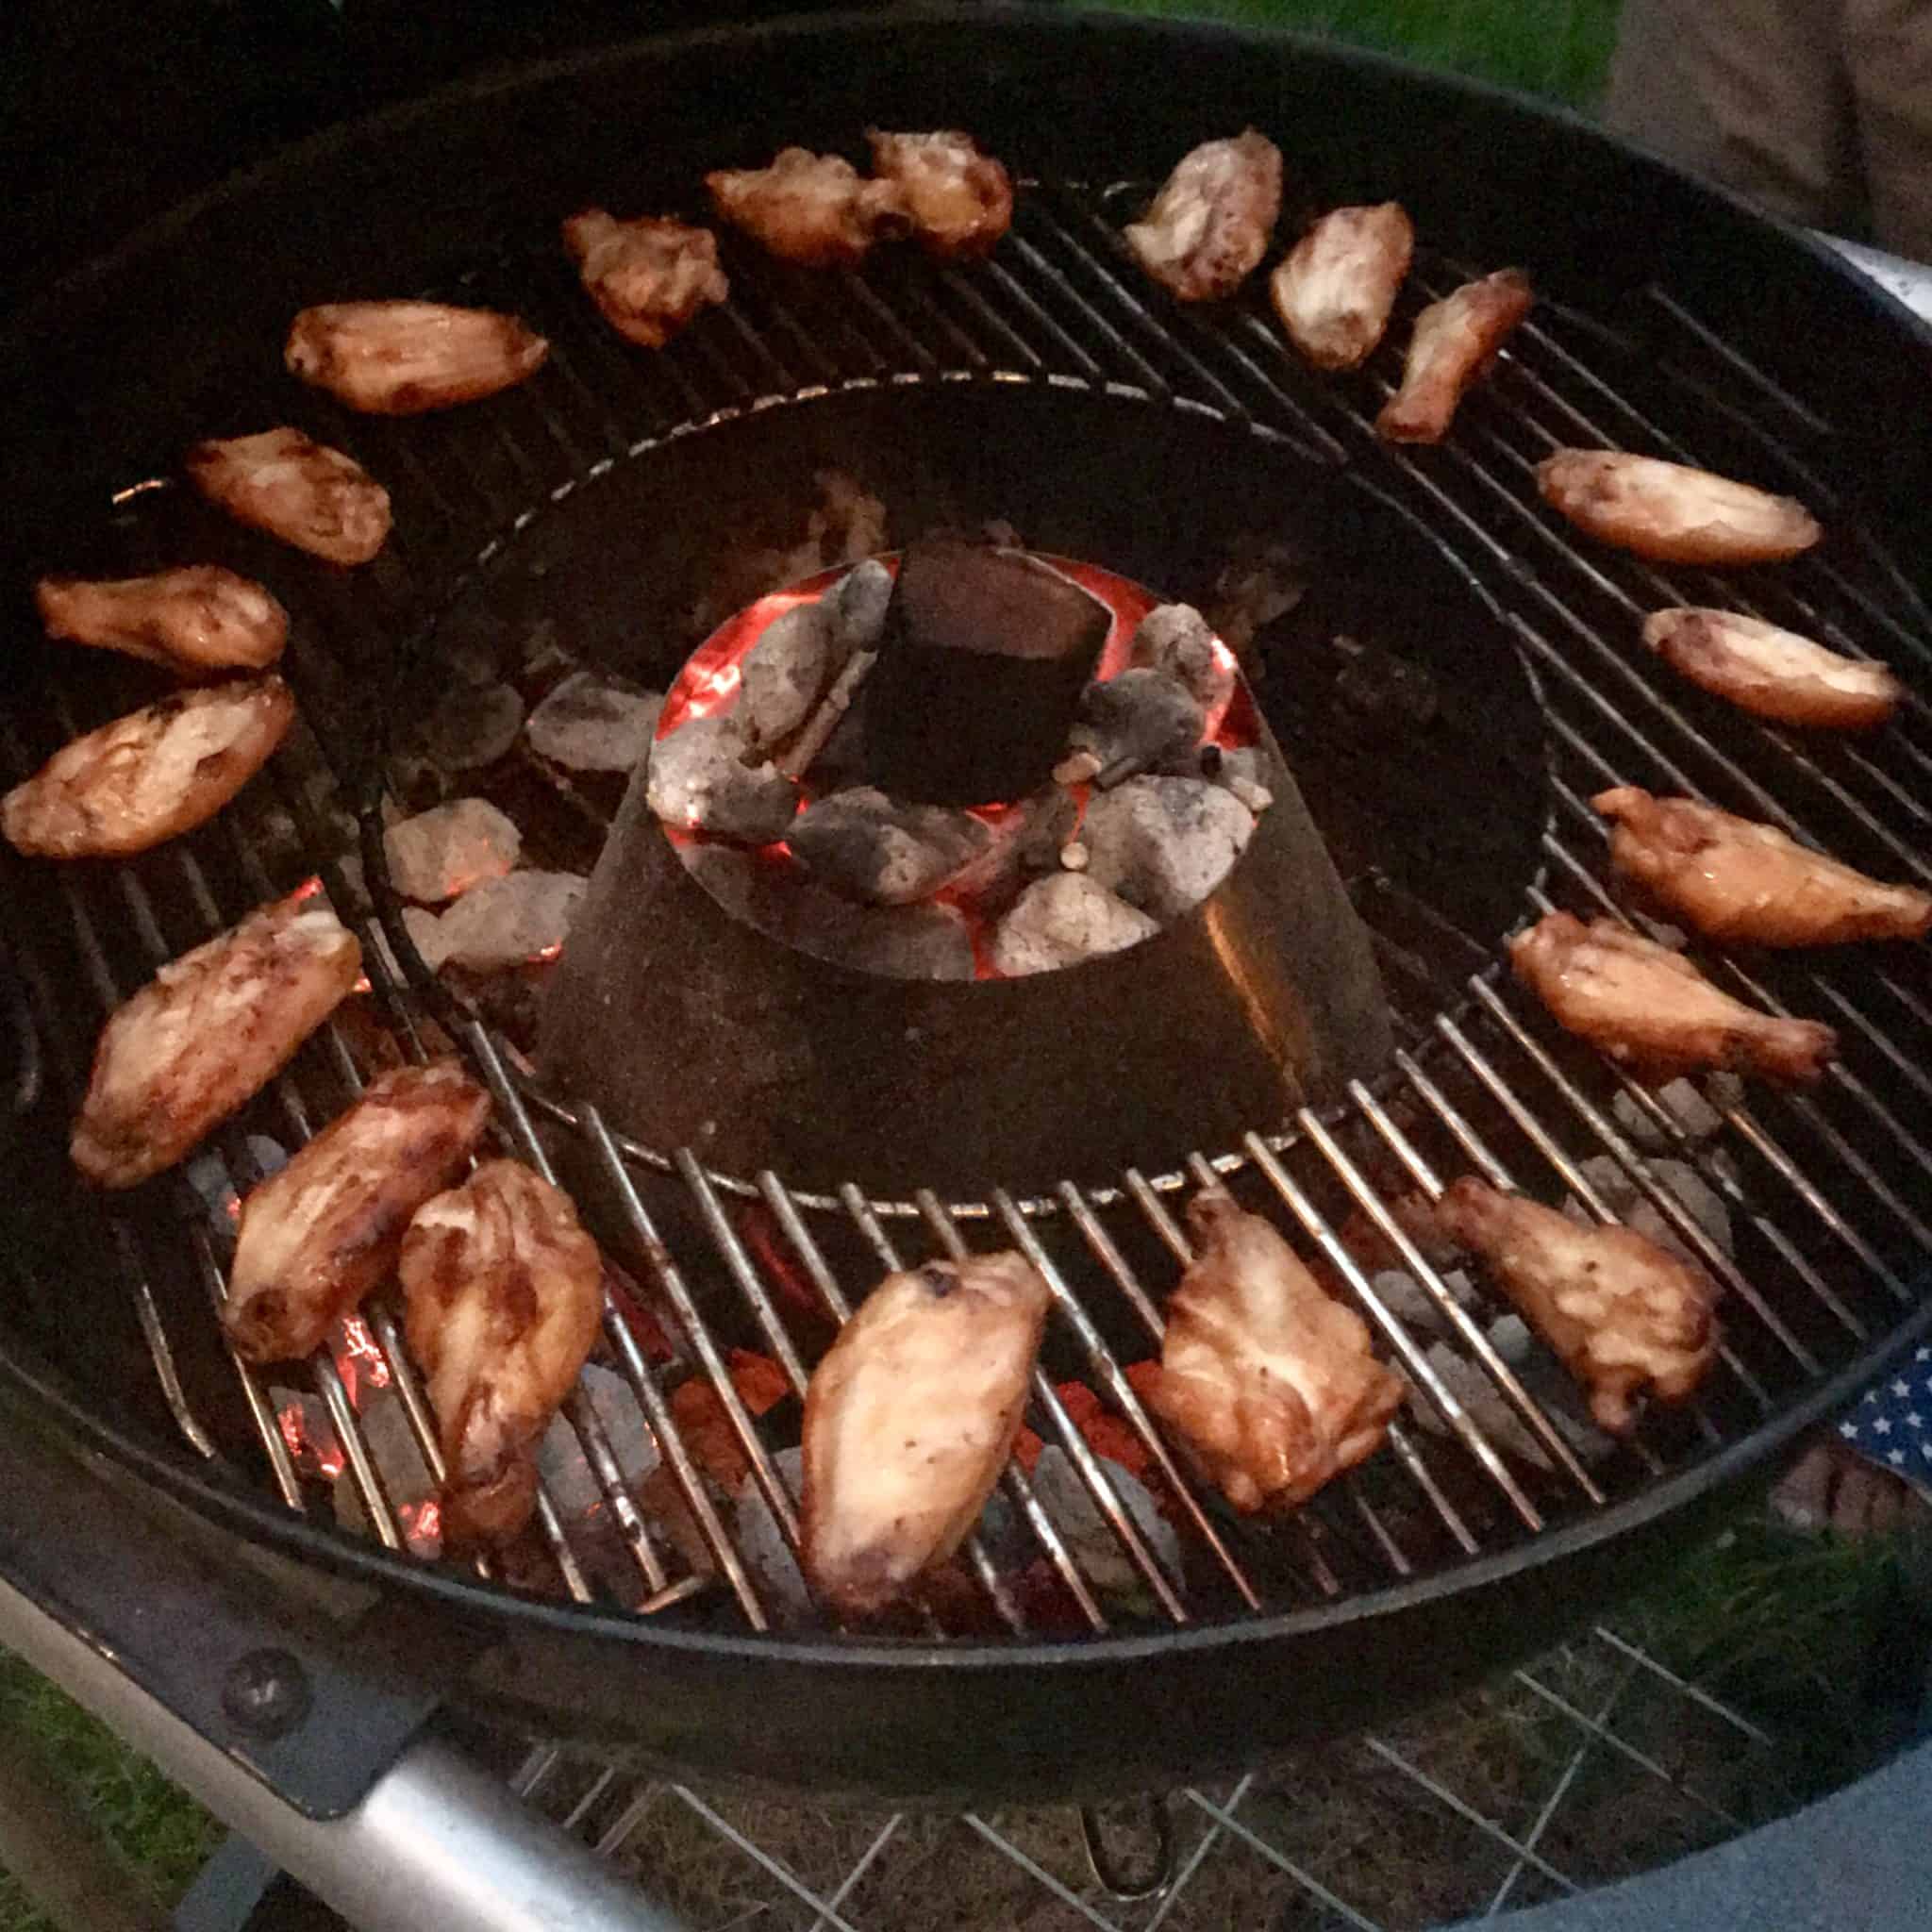 Chicken wings cooked on weber grill with vortex in center